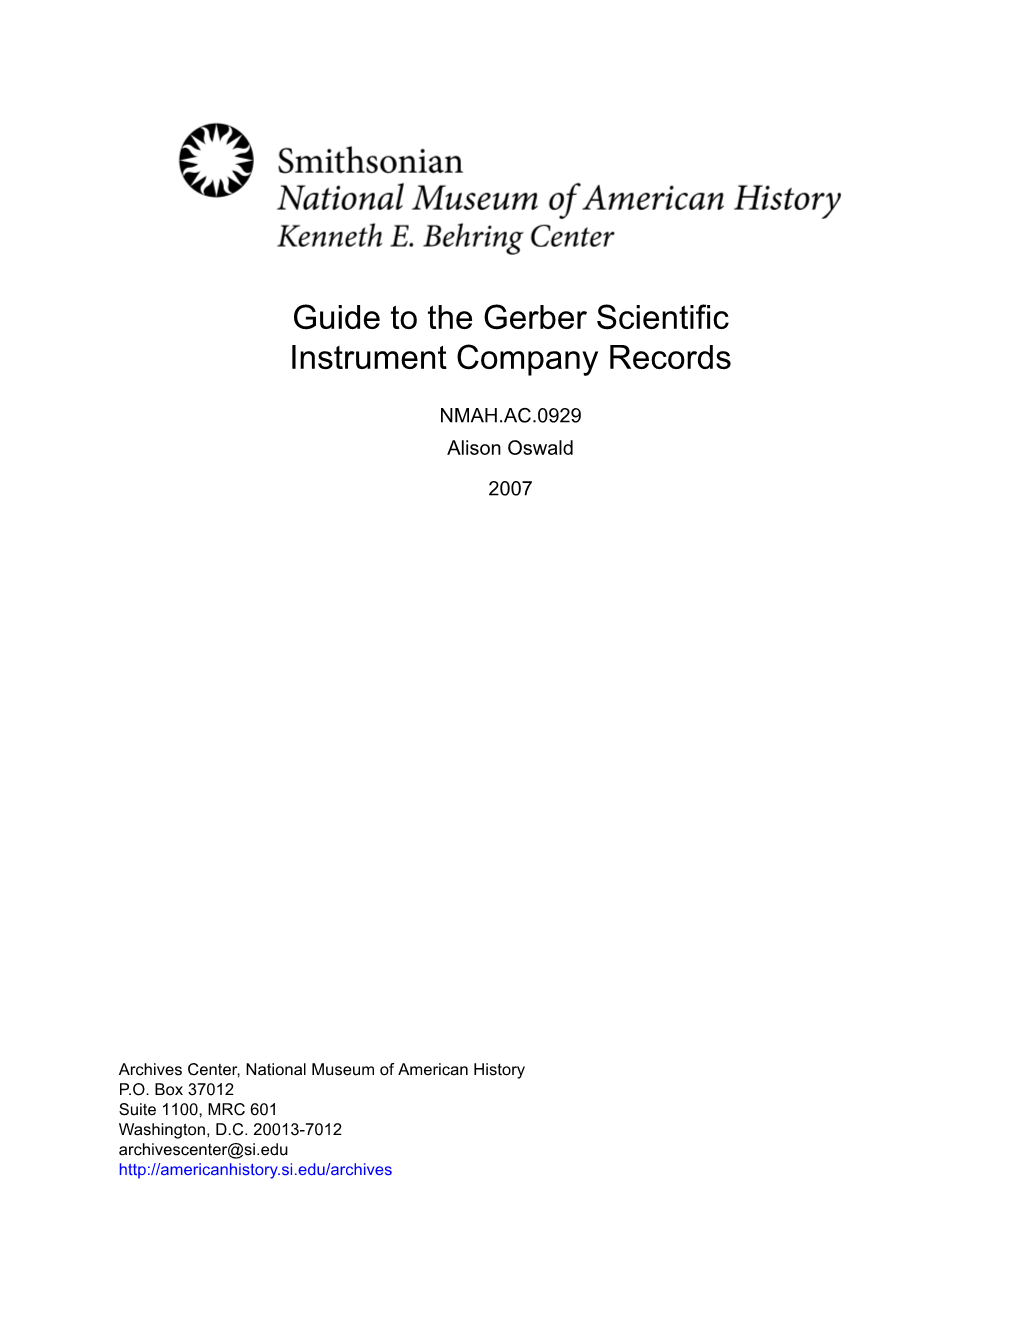 Guide to the Gerber Scientific Instrument Company Records